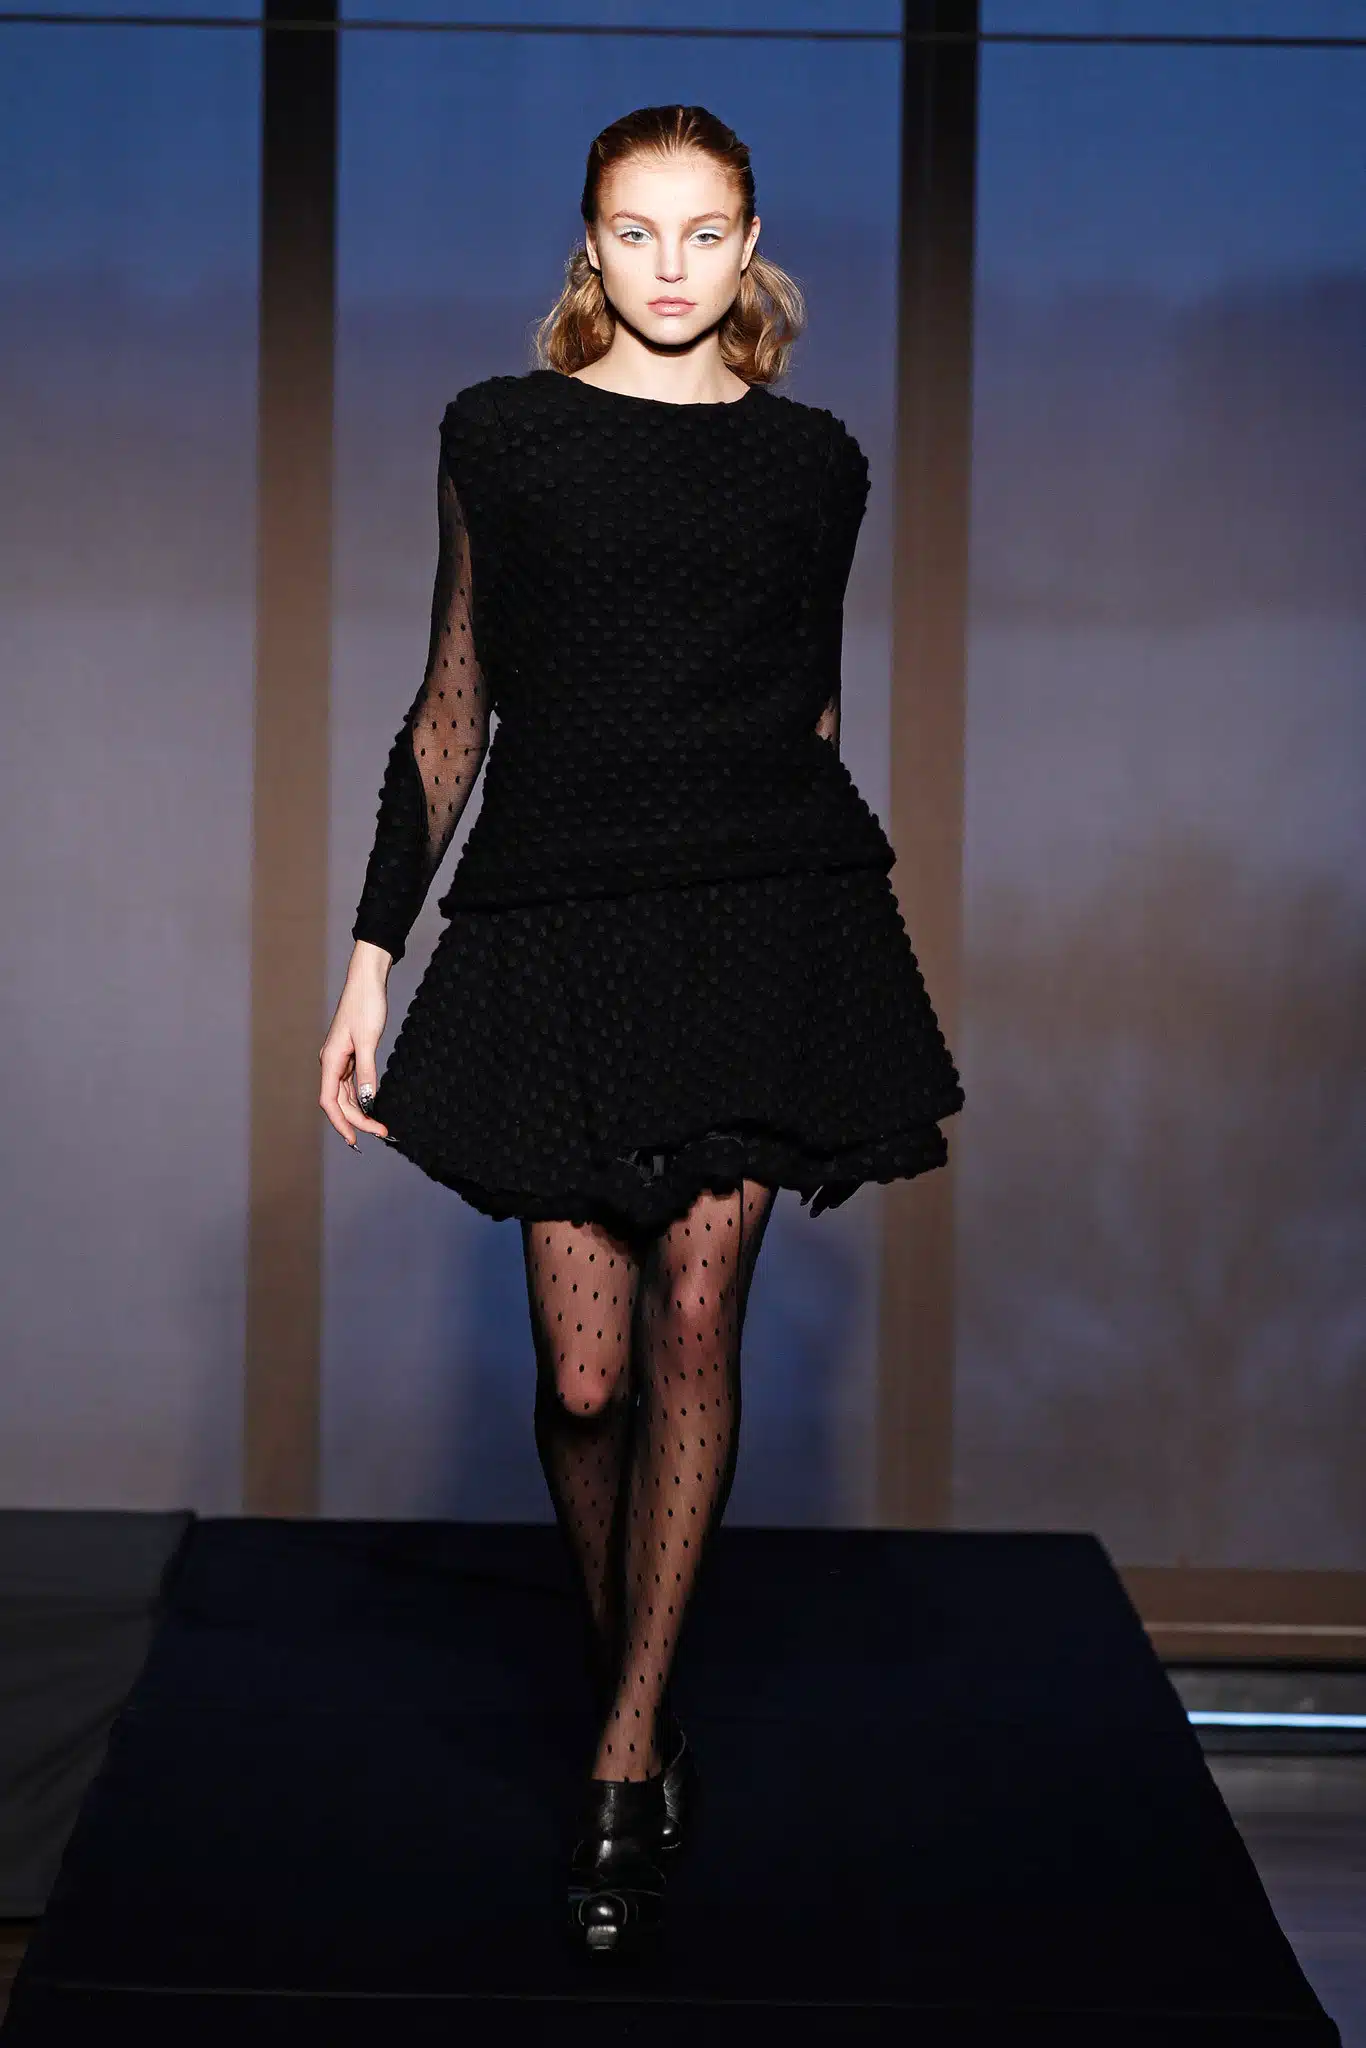 Image from FW13 SHOW Collection